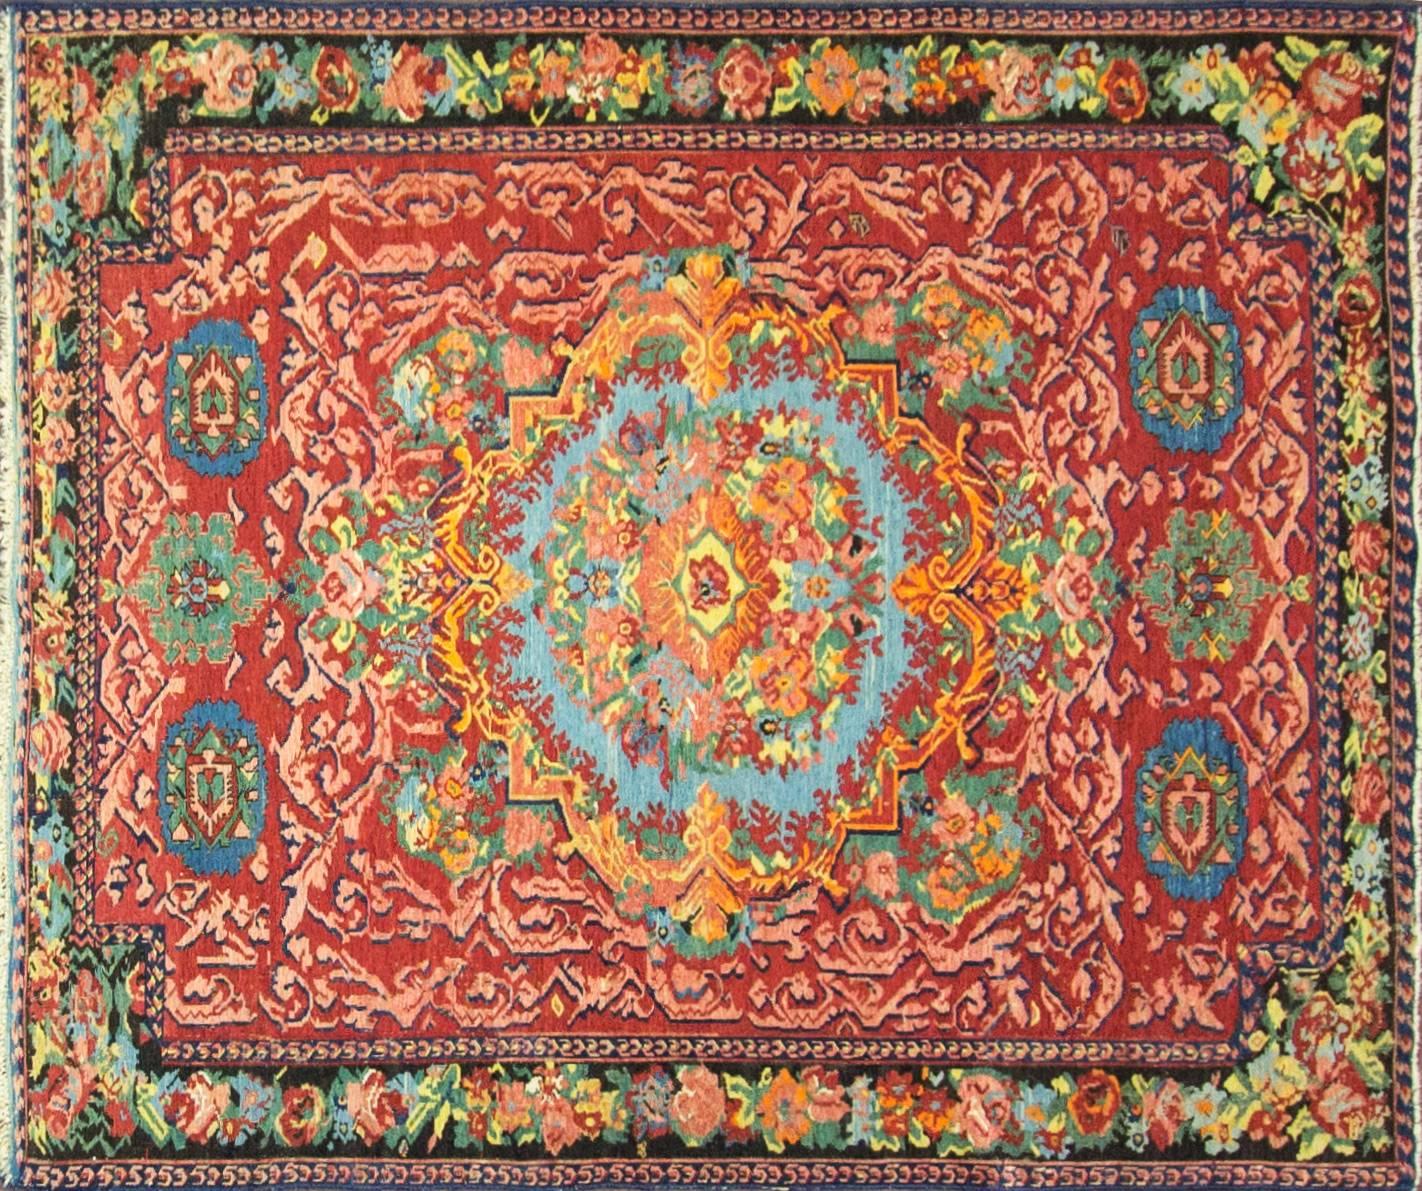 Caucasian rugs are among the most valuable oriental carpets in the world. Since ancient times, rugs from the mountainous Caucasus region have been prized for their superb wool, bright colors and exceptional weaving quality. Traditional Caucasian